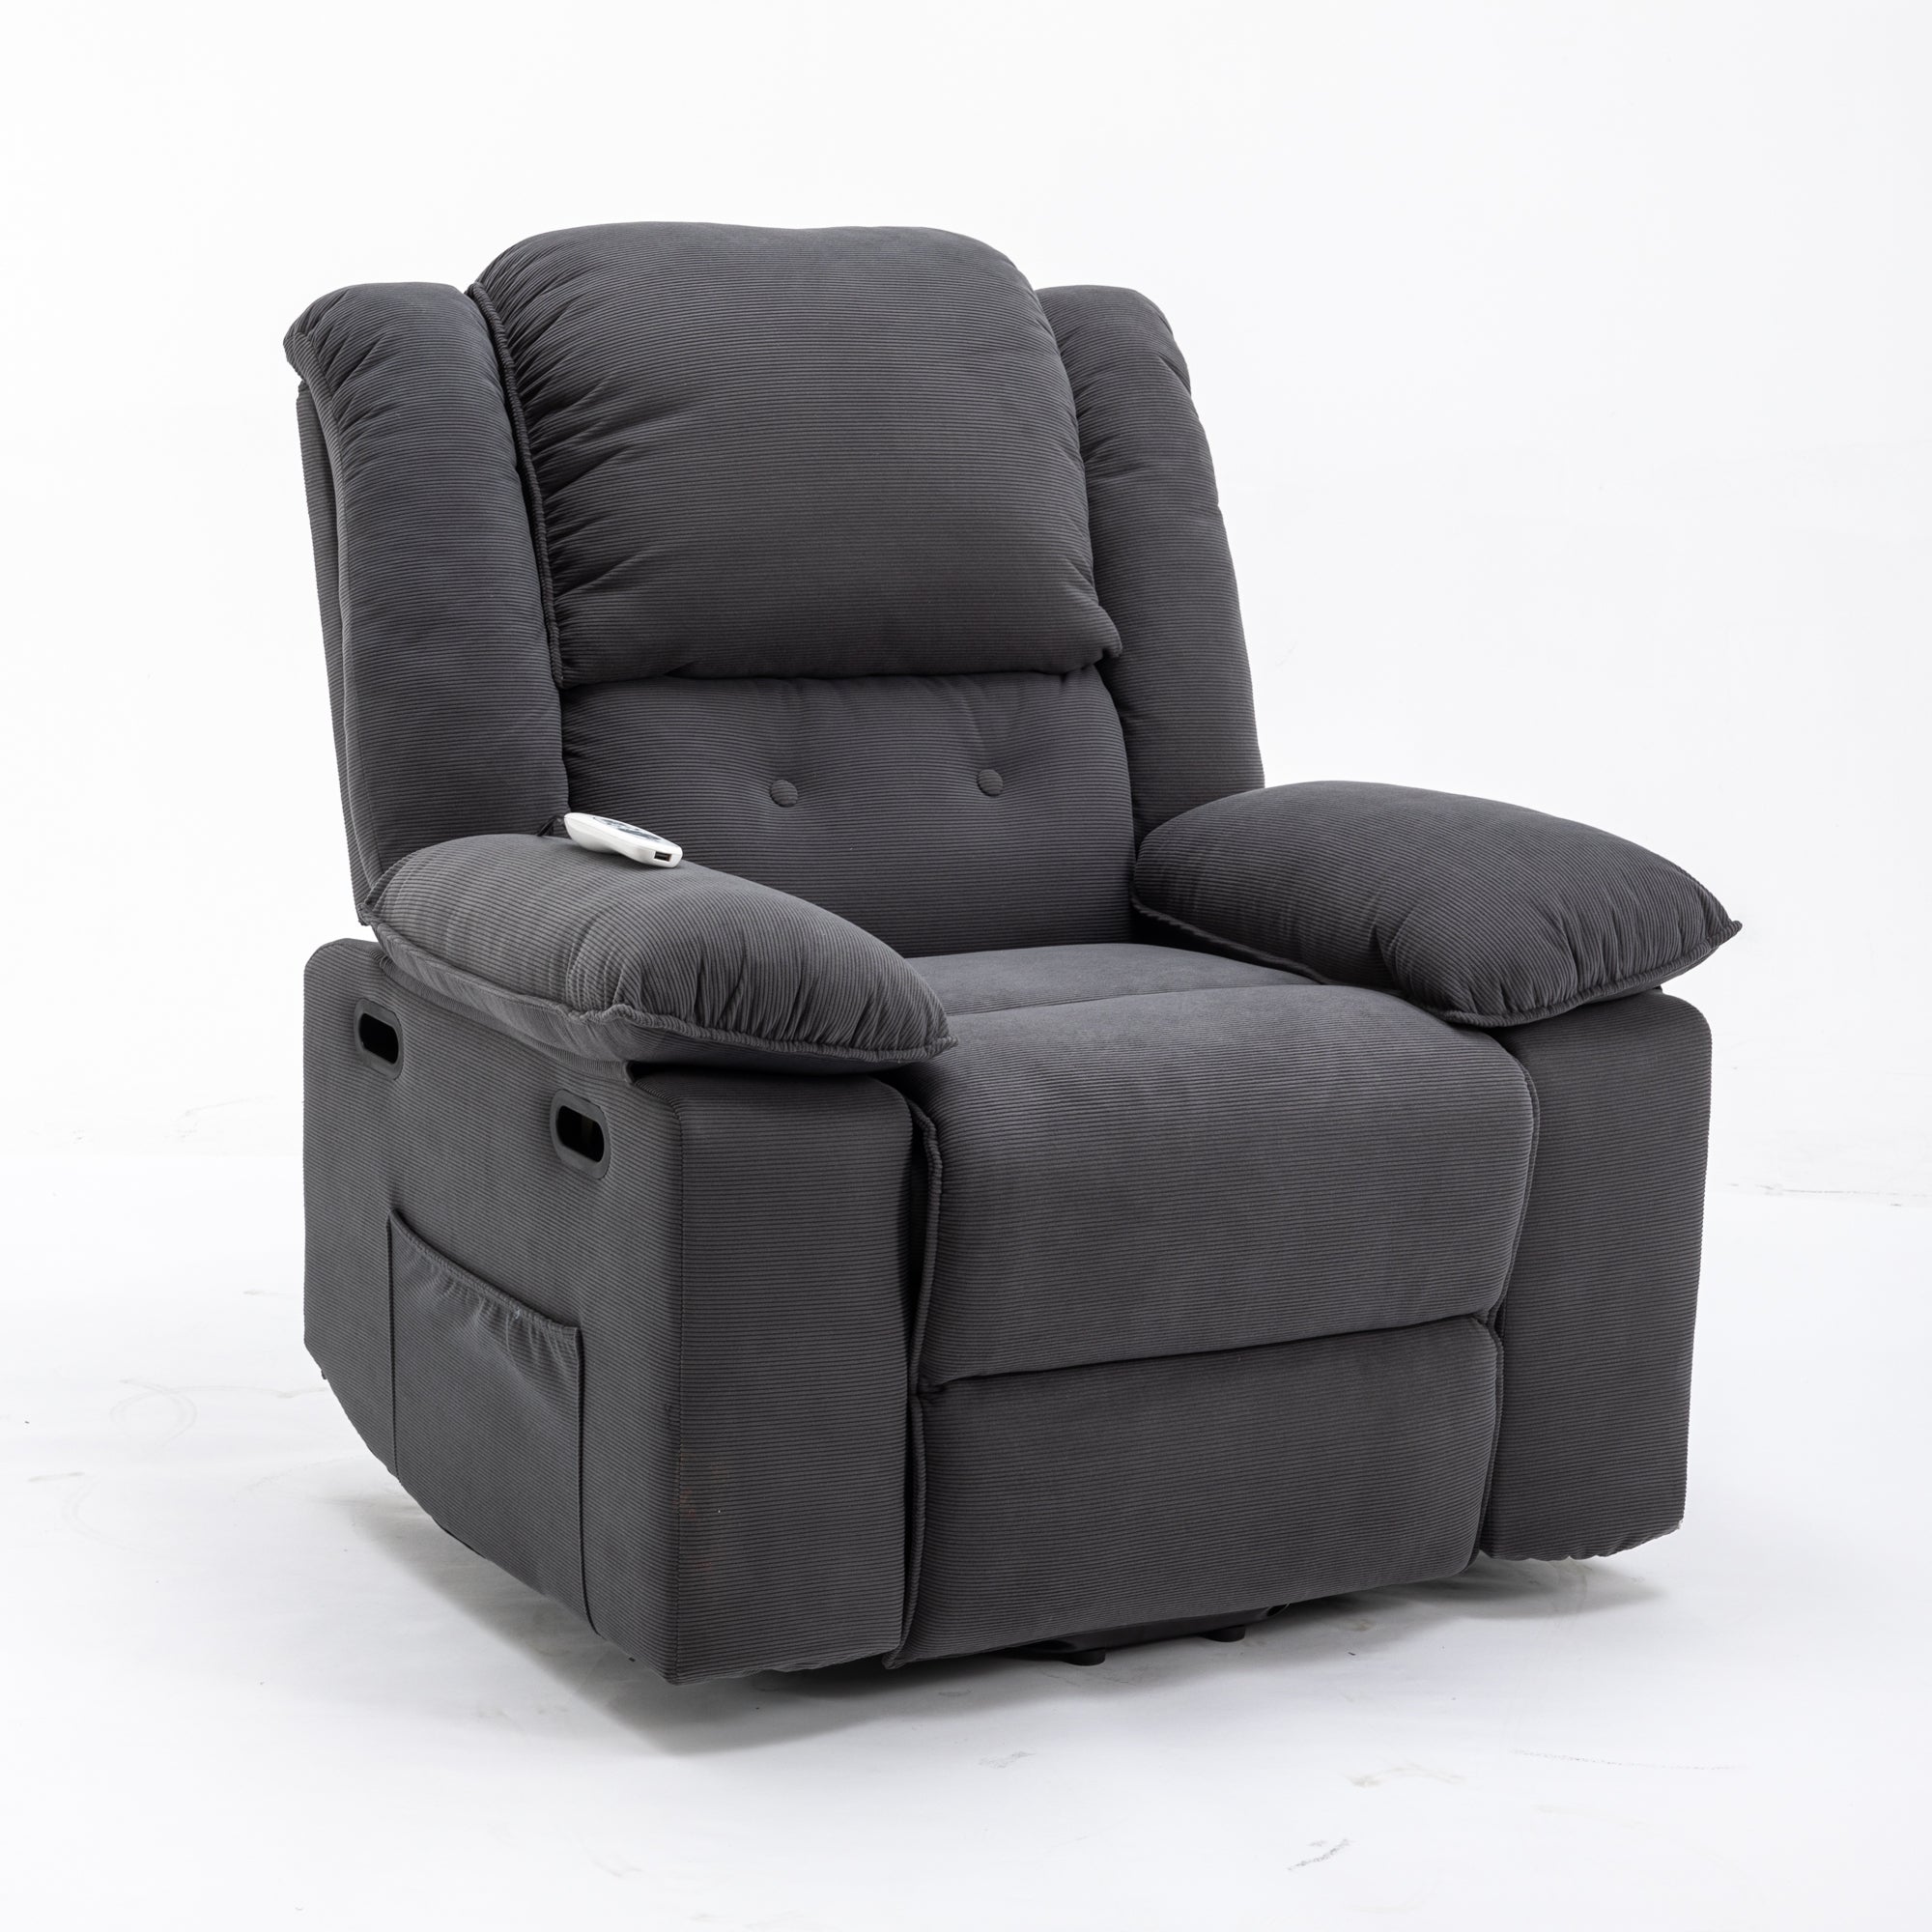 Gray Power Lift Chair Front Profile